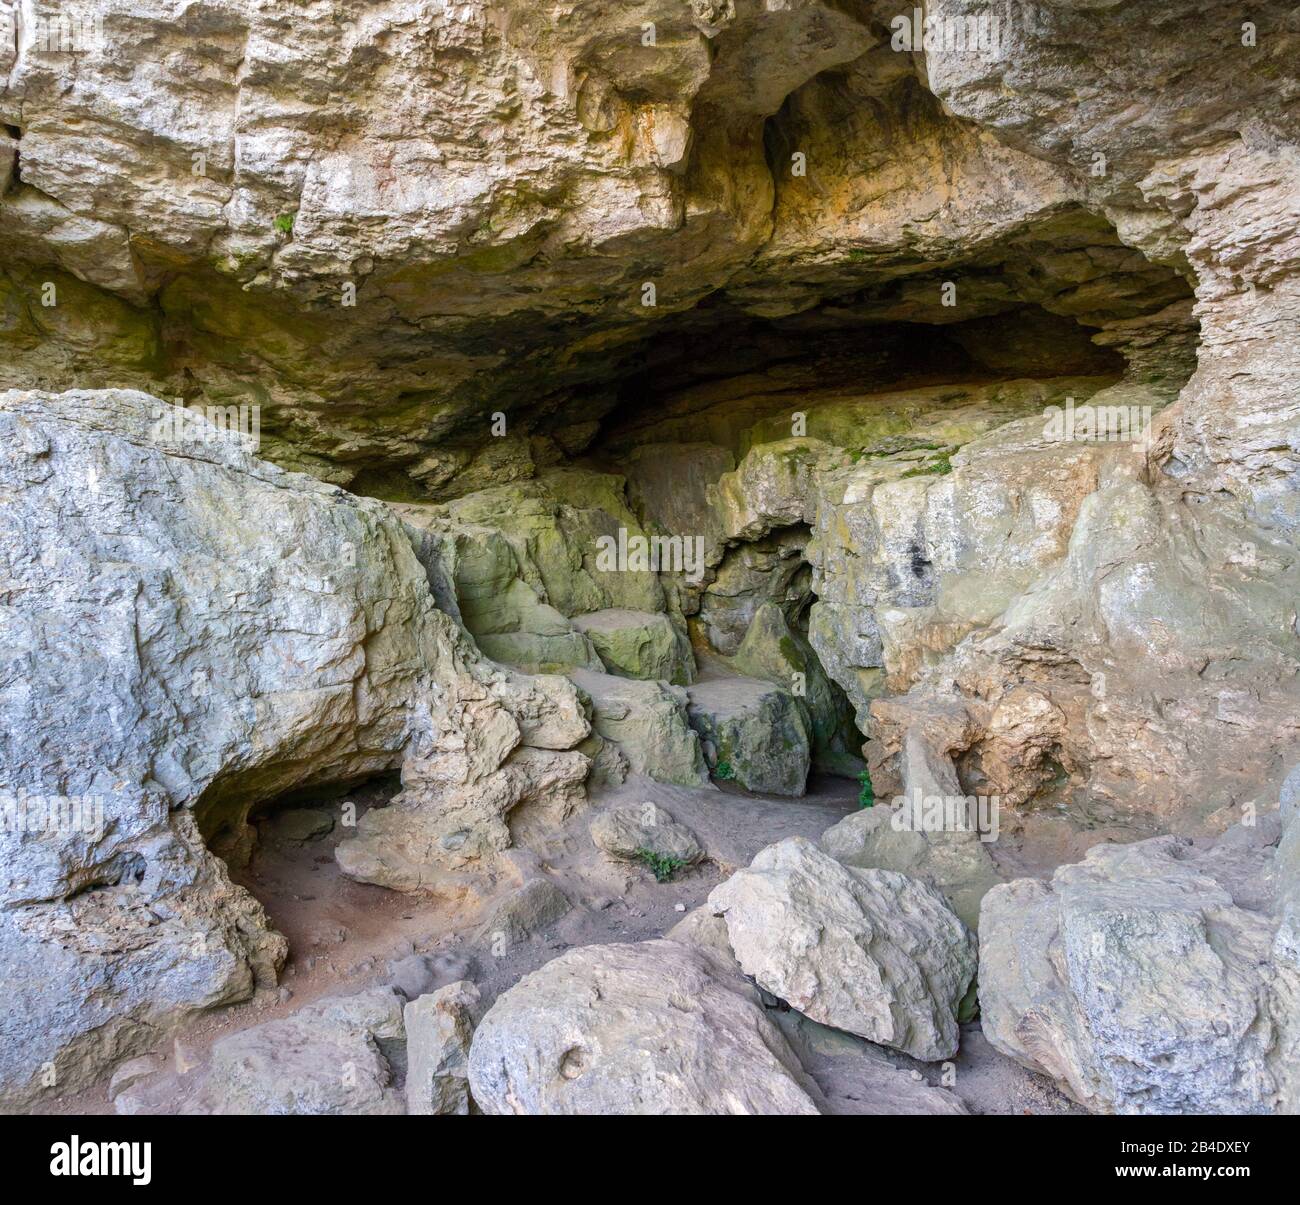 Germany, Baden-Württemberg, Owen, Sibyllenhöhle in the rock under the castle ruins Teck. In the cave once lived the Sibyl, a wise and helpful woman. Stock Photo